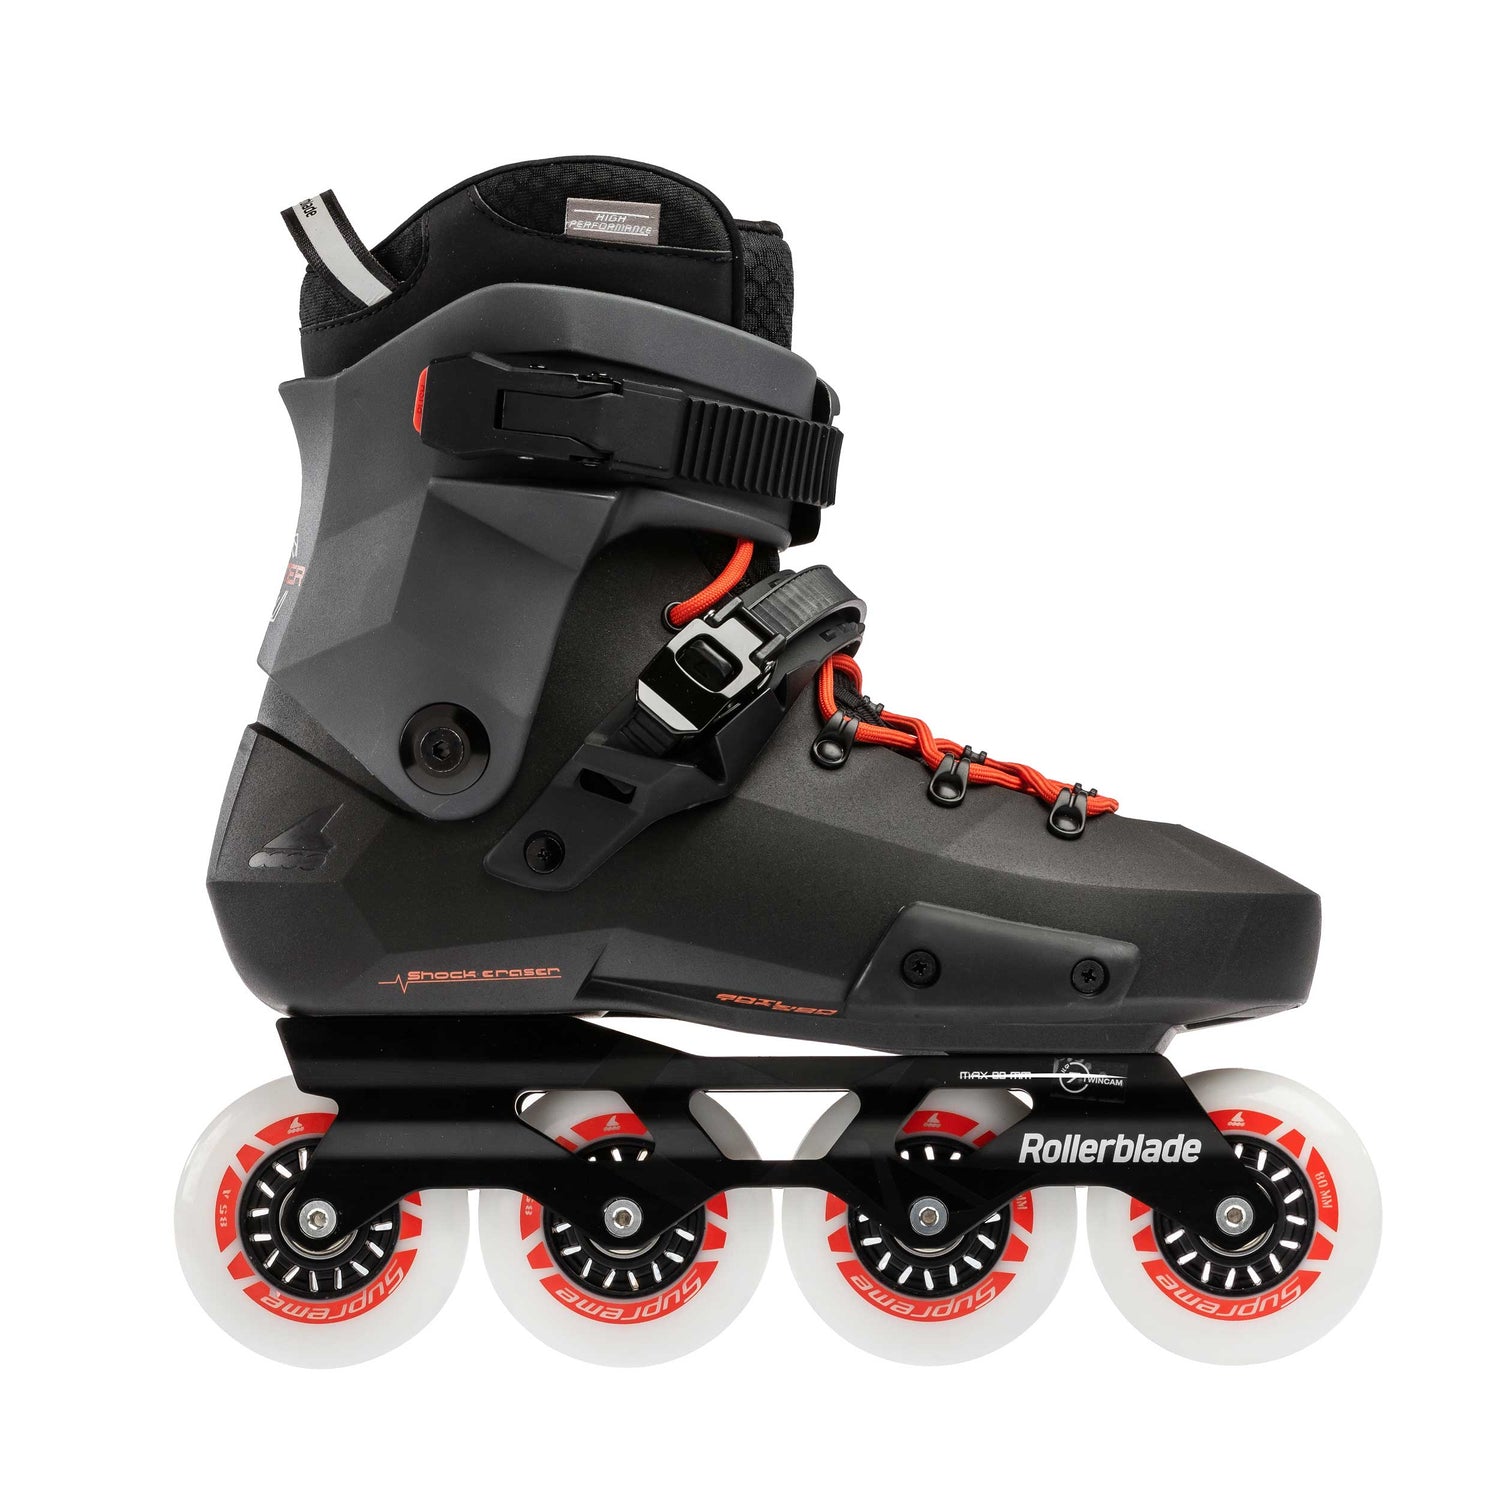 All spare parts for the Rollerblade Twister/Maxxum skates